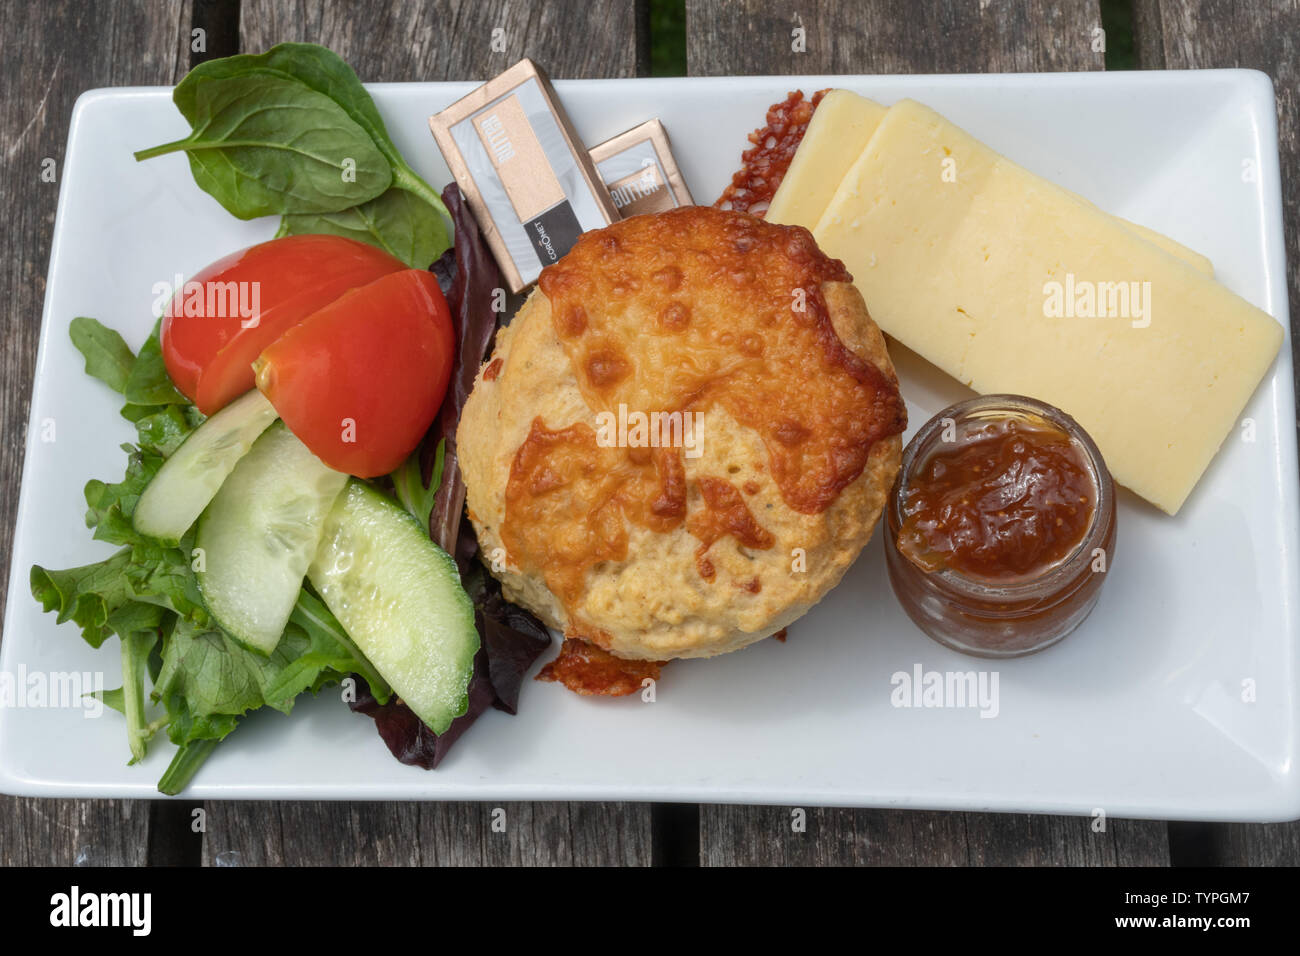 A savoury tea with cheese scone, cheese, butter, chutney and salad, England, UK Stock Photo